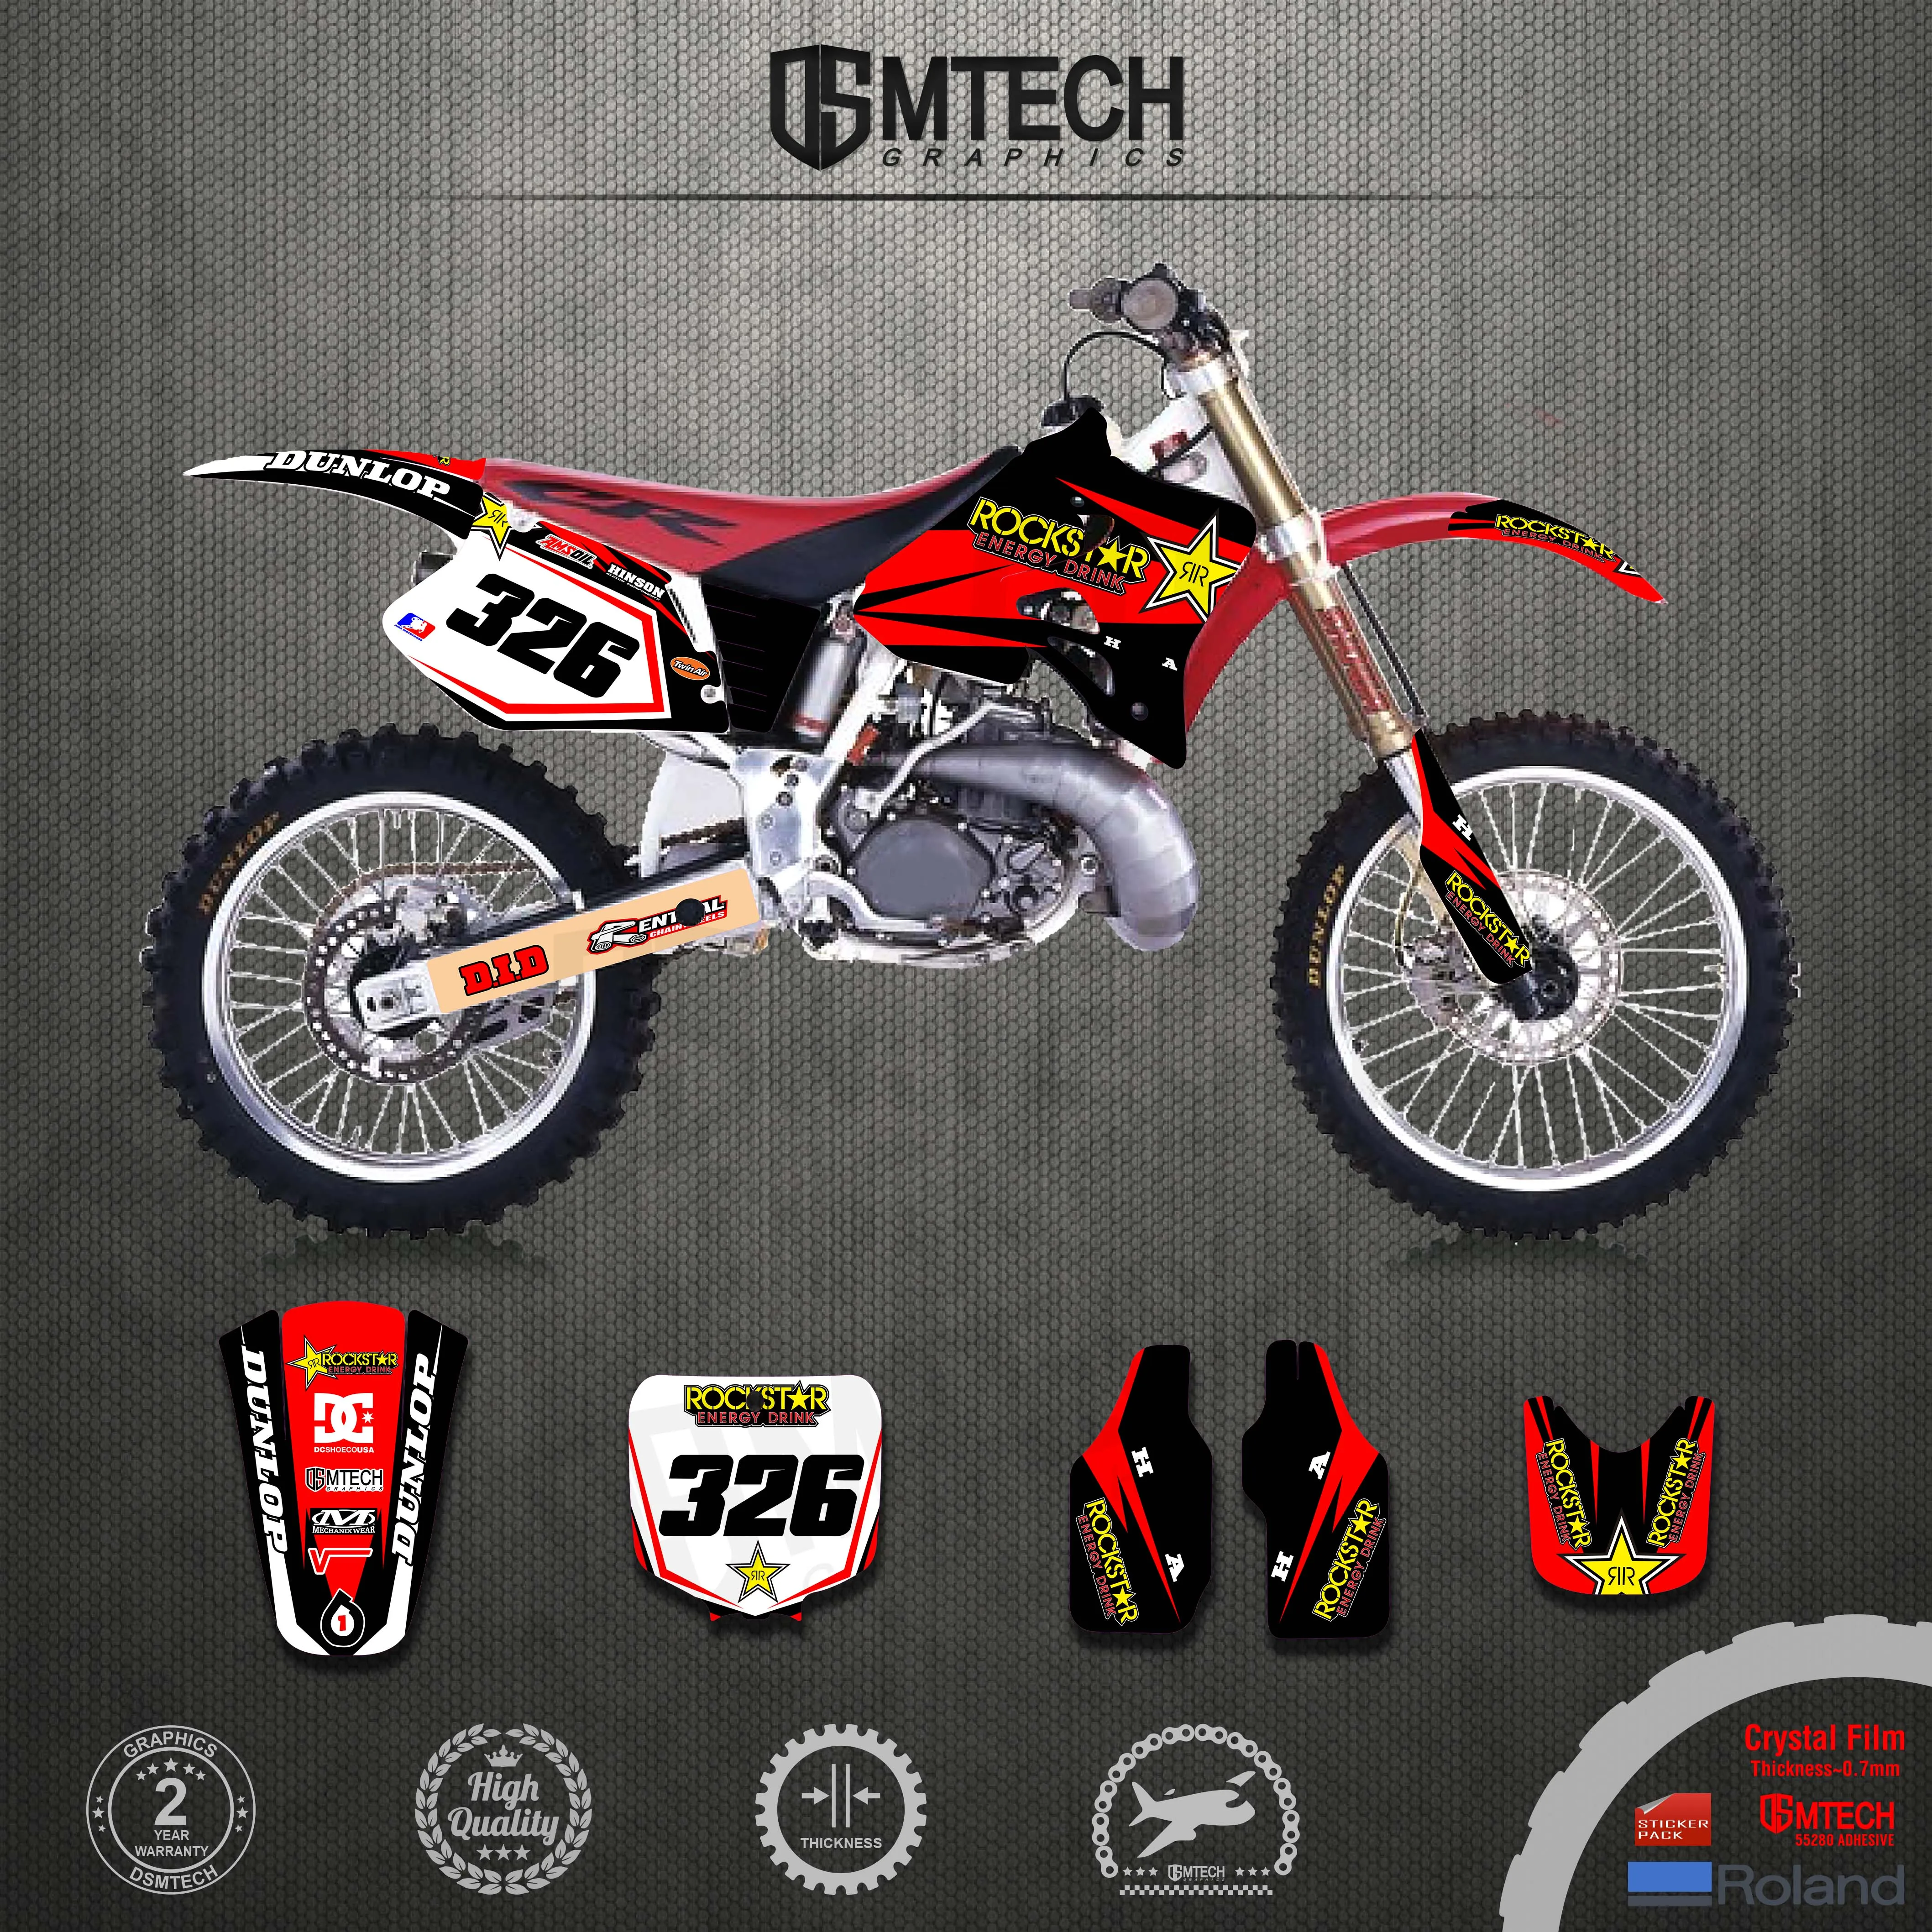 DSMTECH For Honda CR250 CR 250 1995 1996 CR250R TEAM DECALS GRAPHICS BACKGROUNDS Stickers for Honda CR125 CR125R 1995 1996 1997